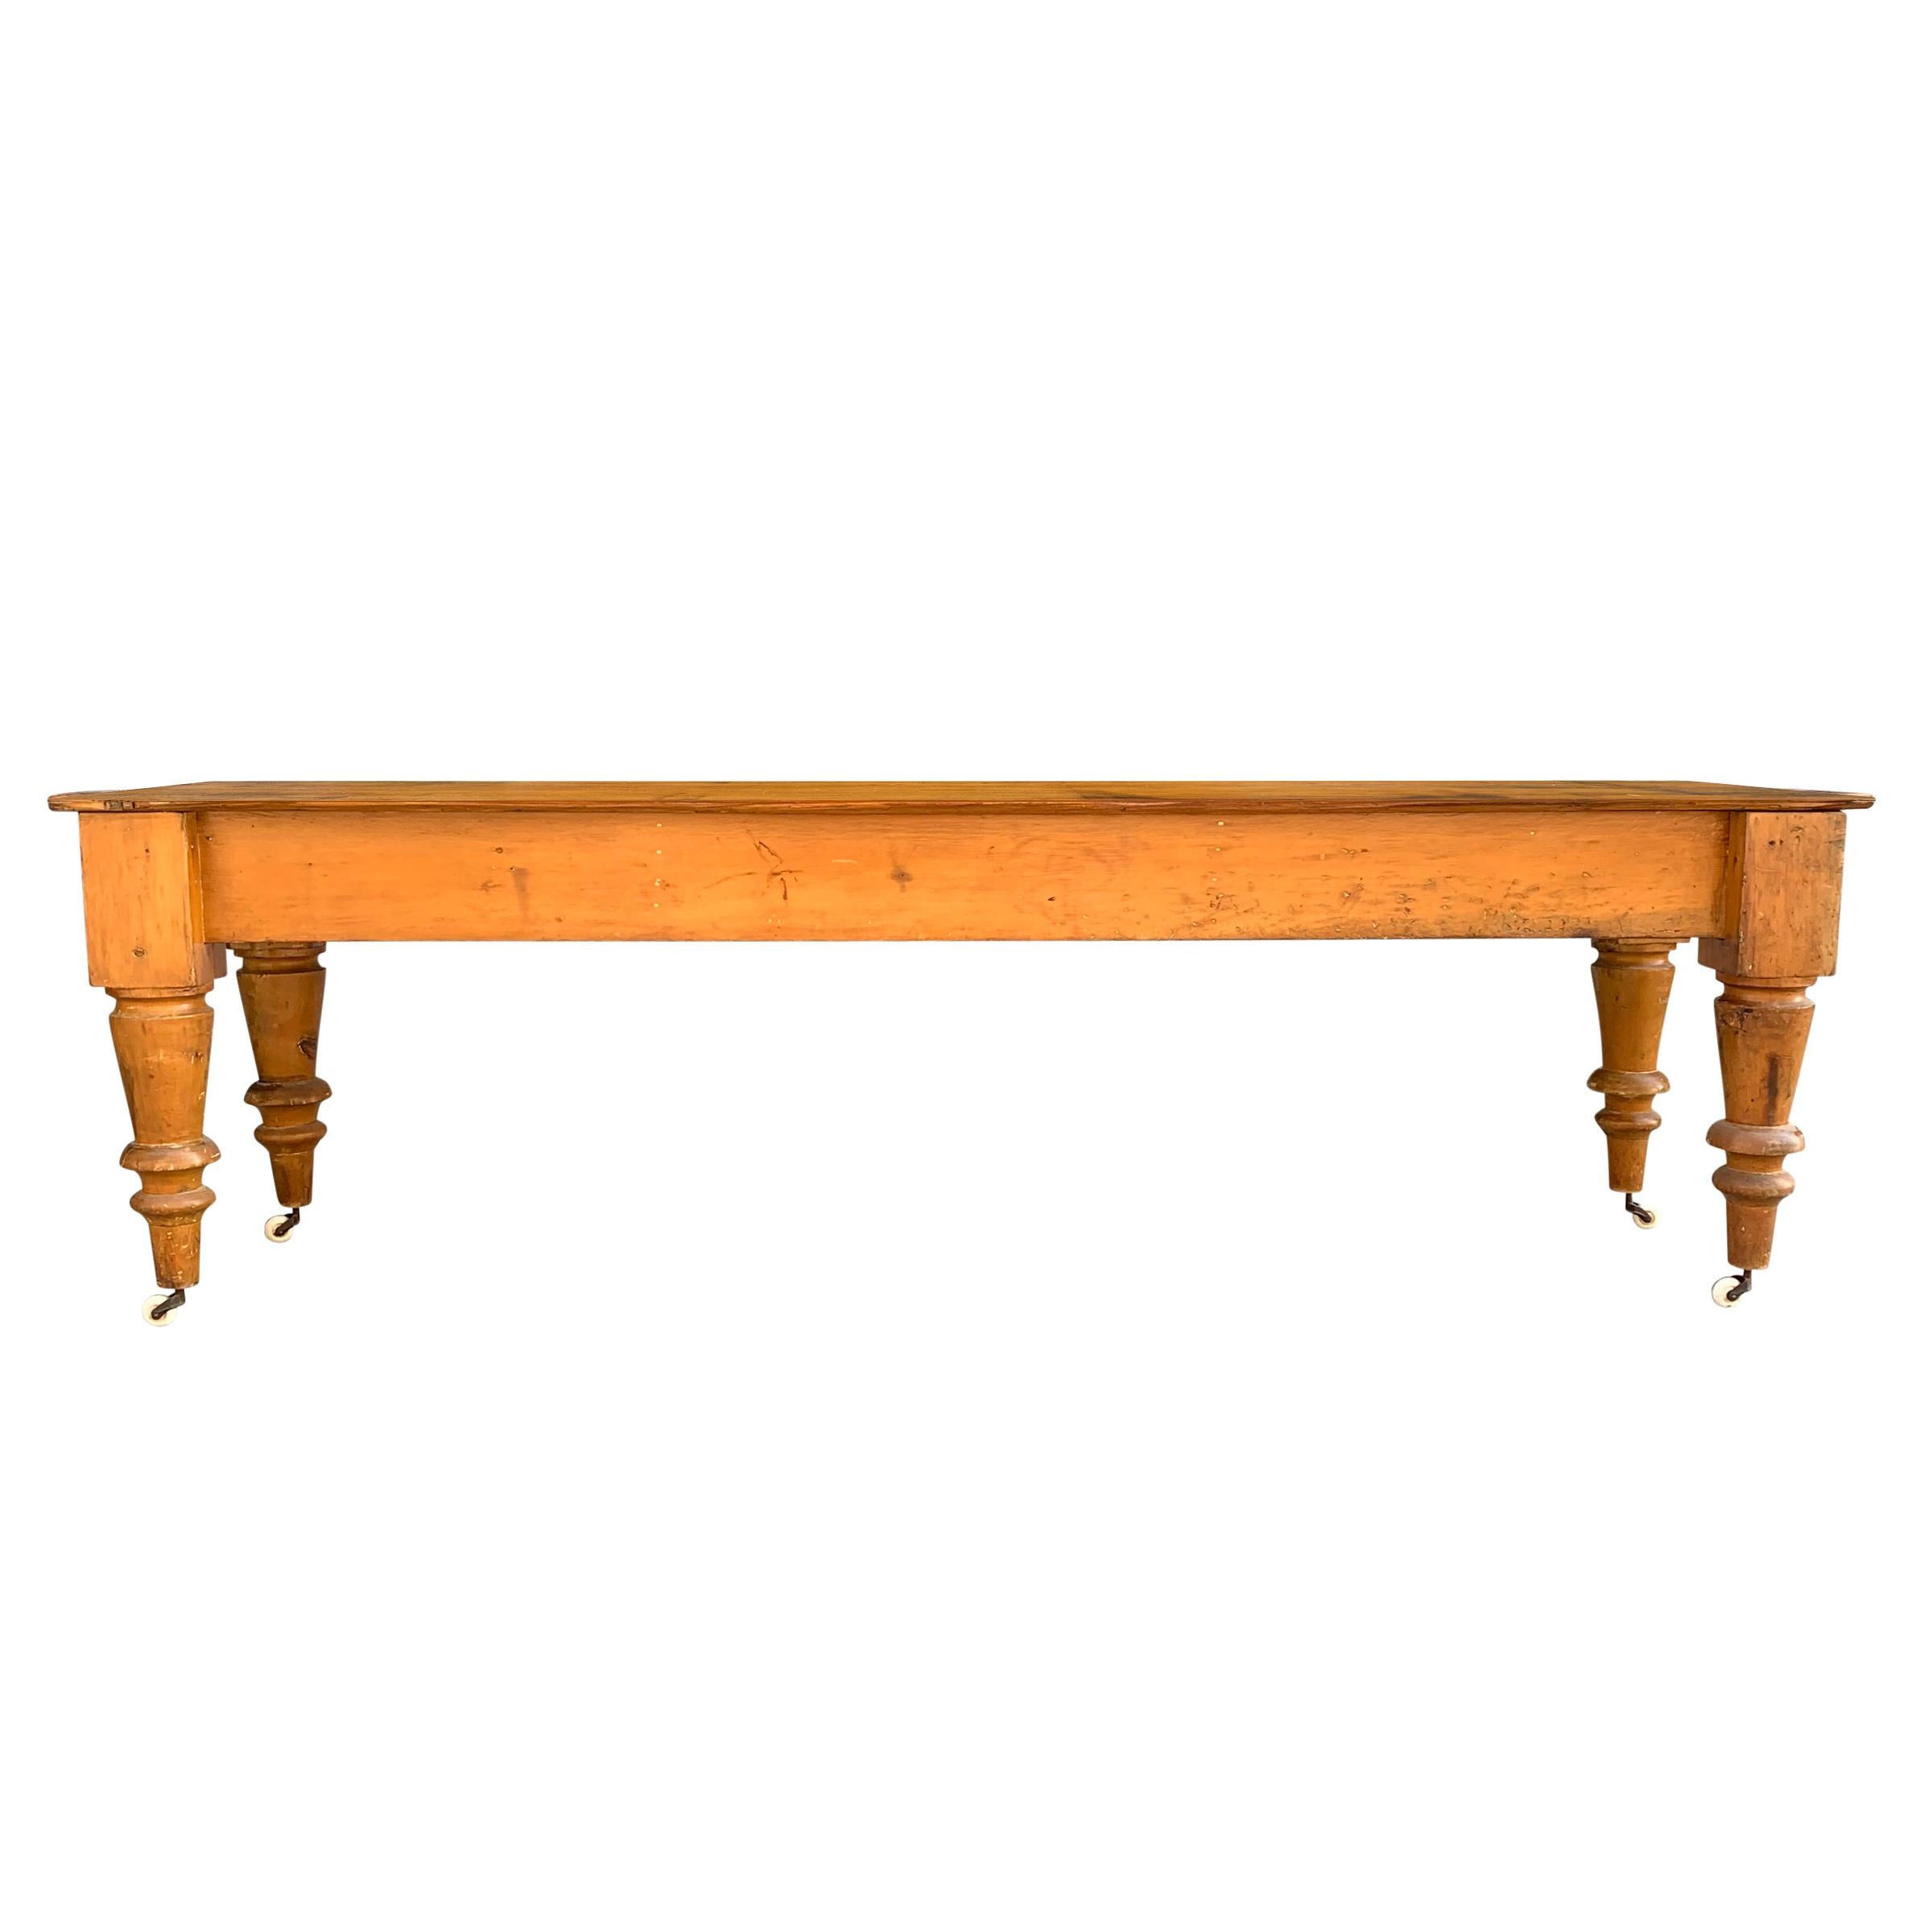 A wonderful 19th century American maple harvest table, probably from a butcher's shop or bakery with overly exaggerated turned tapered legs with porcelain casters and a well-worn top with one live-edge and one strait edge. Perfect for dining, but